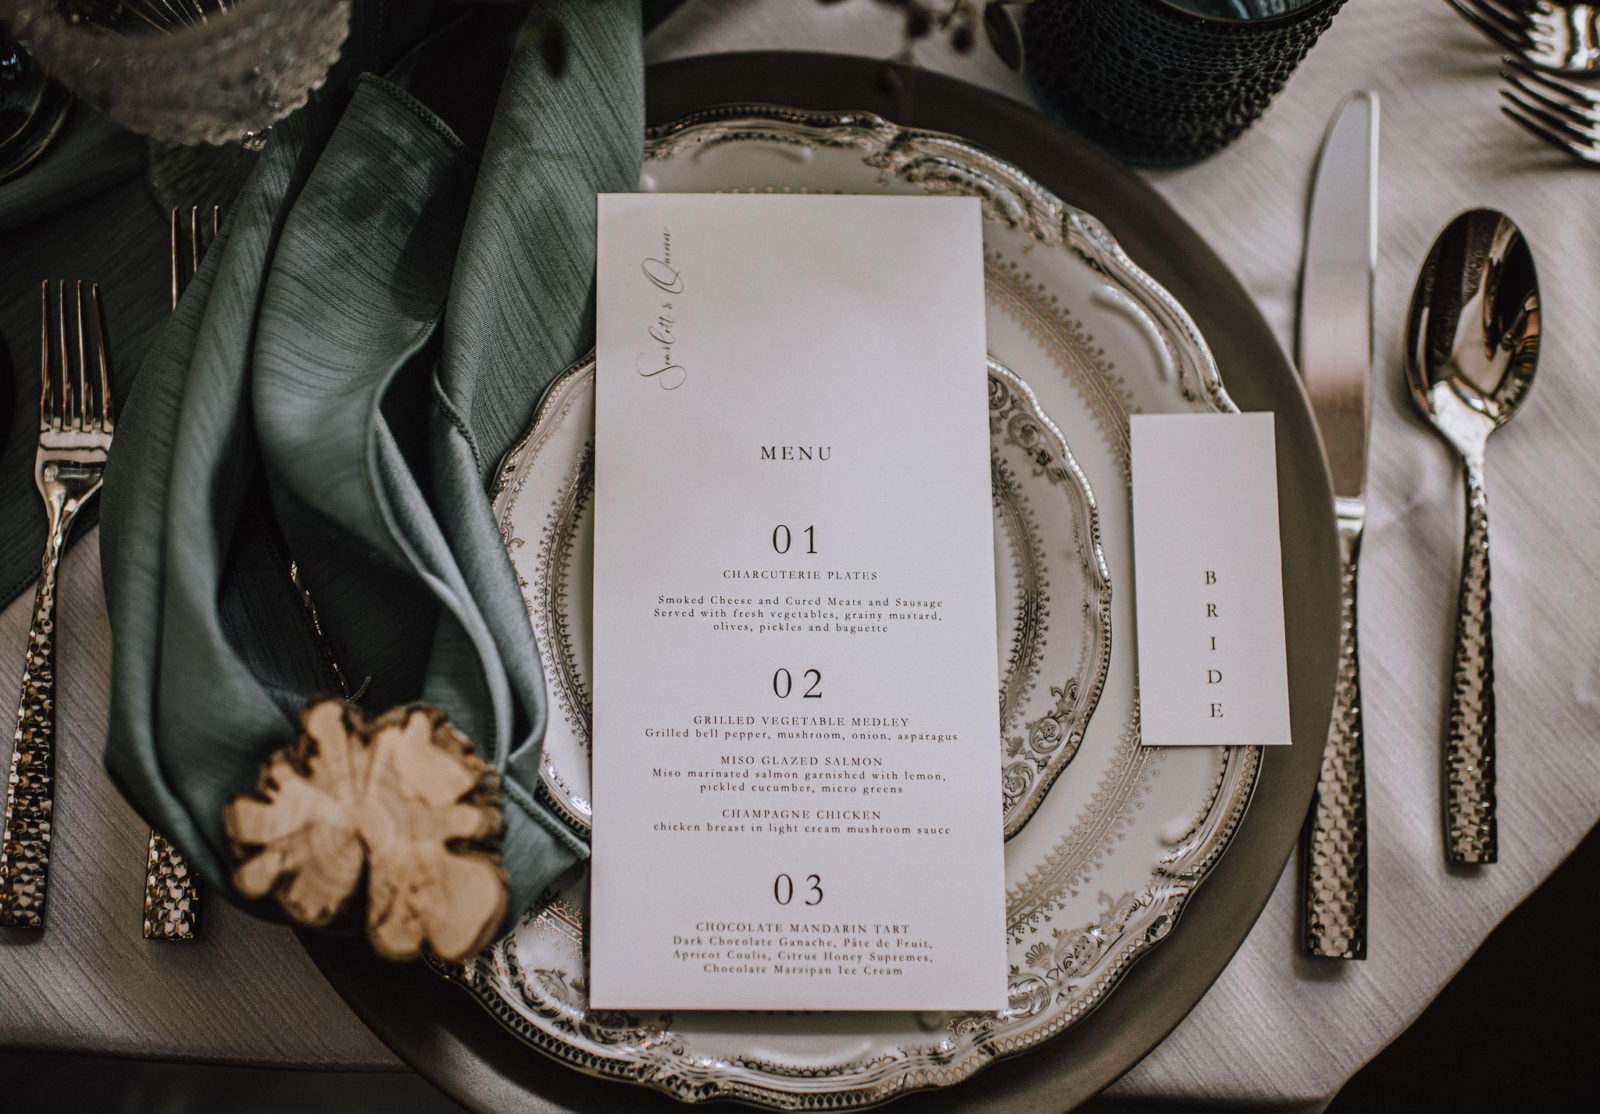 Wedding menu design inspiration with dusty blue and silver accents for a moody winter wedding